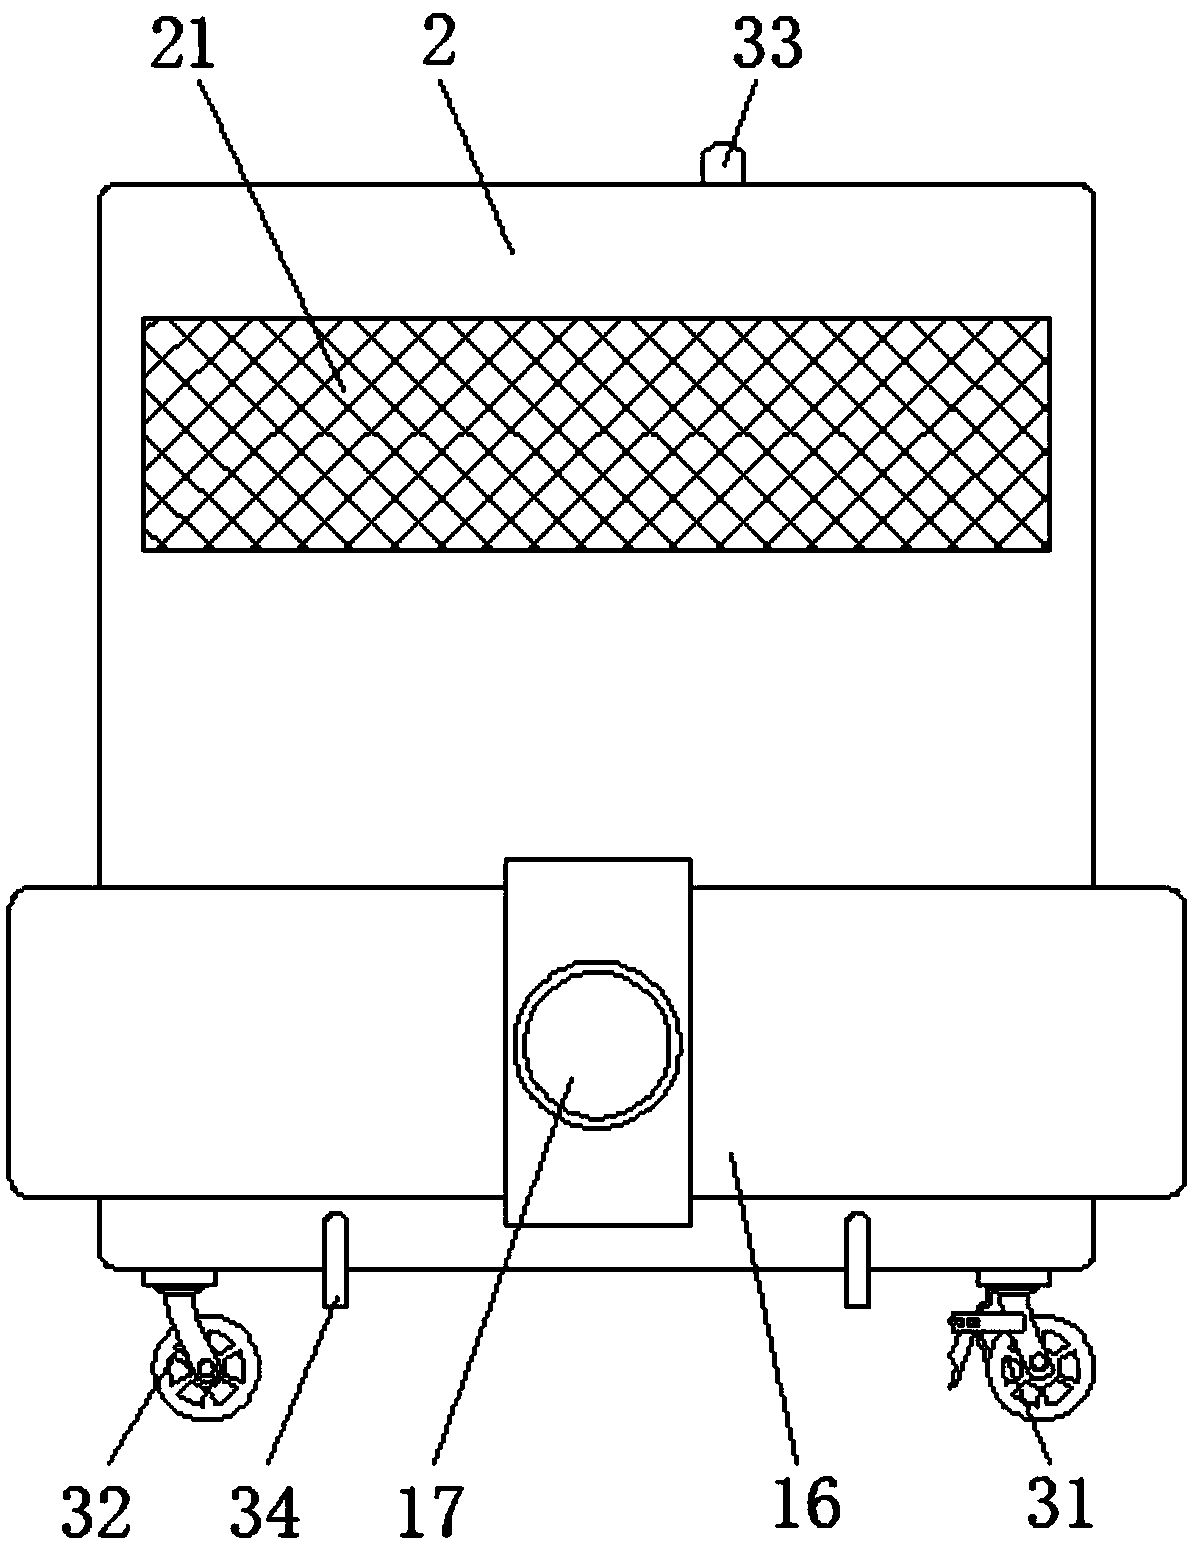 Gynecological microwave therapeutic apparatus for relieving pains of patients